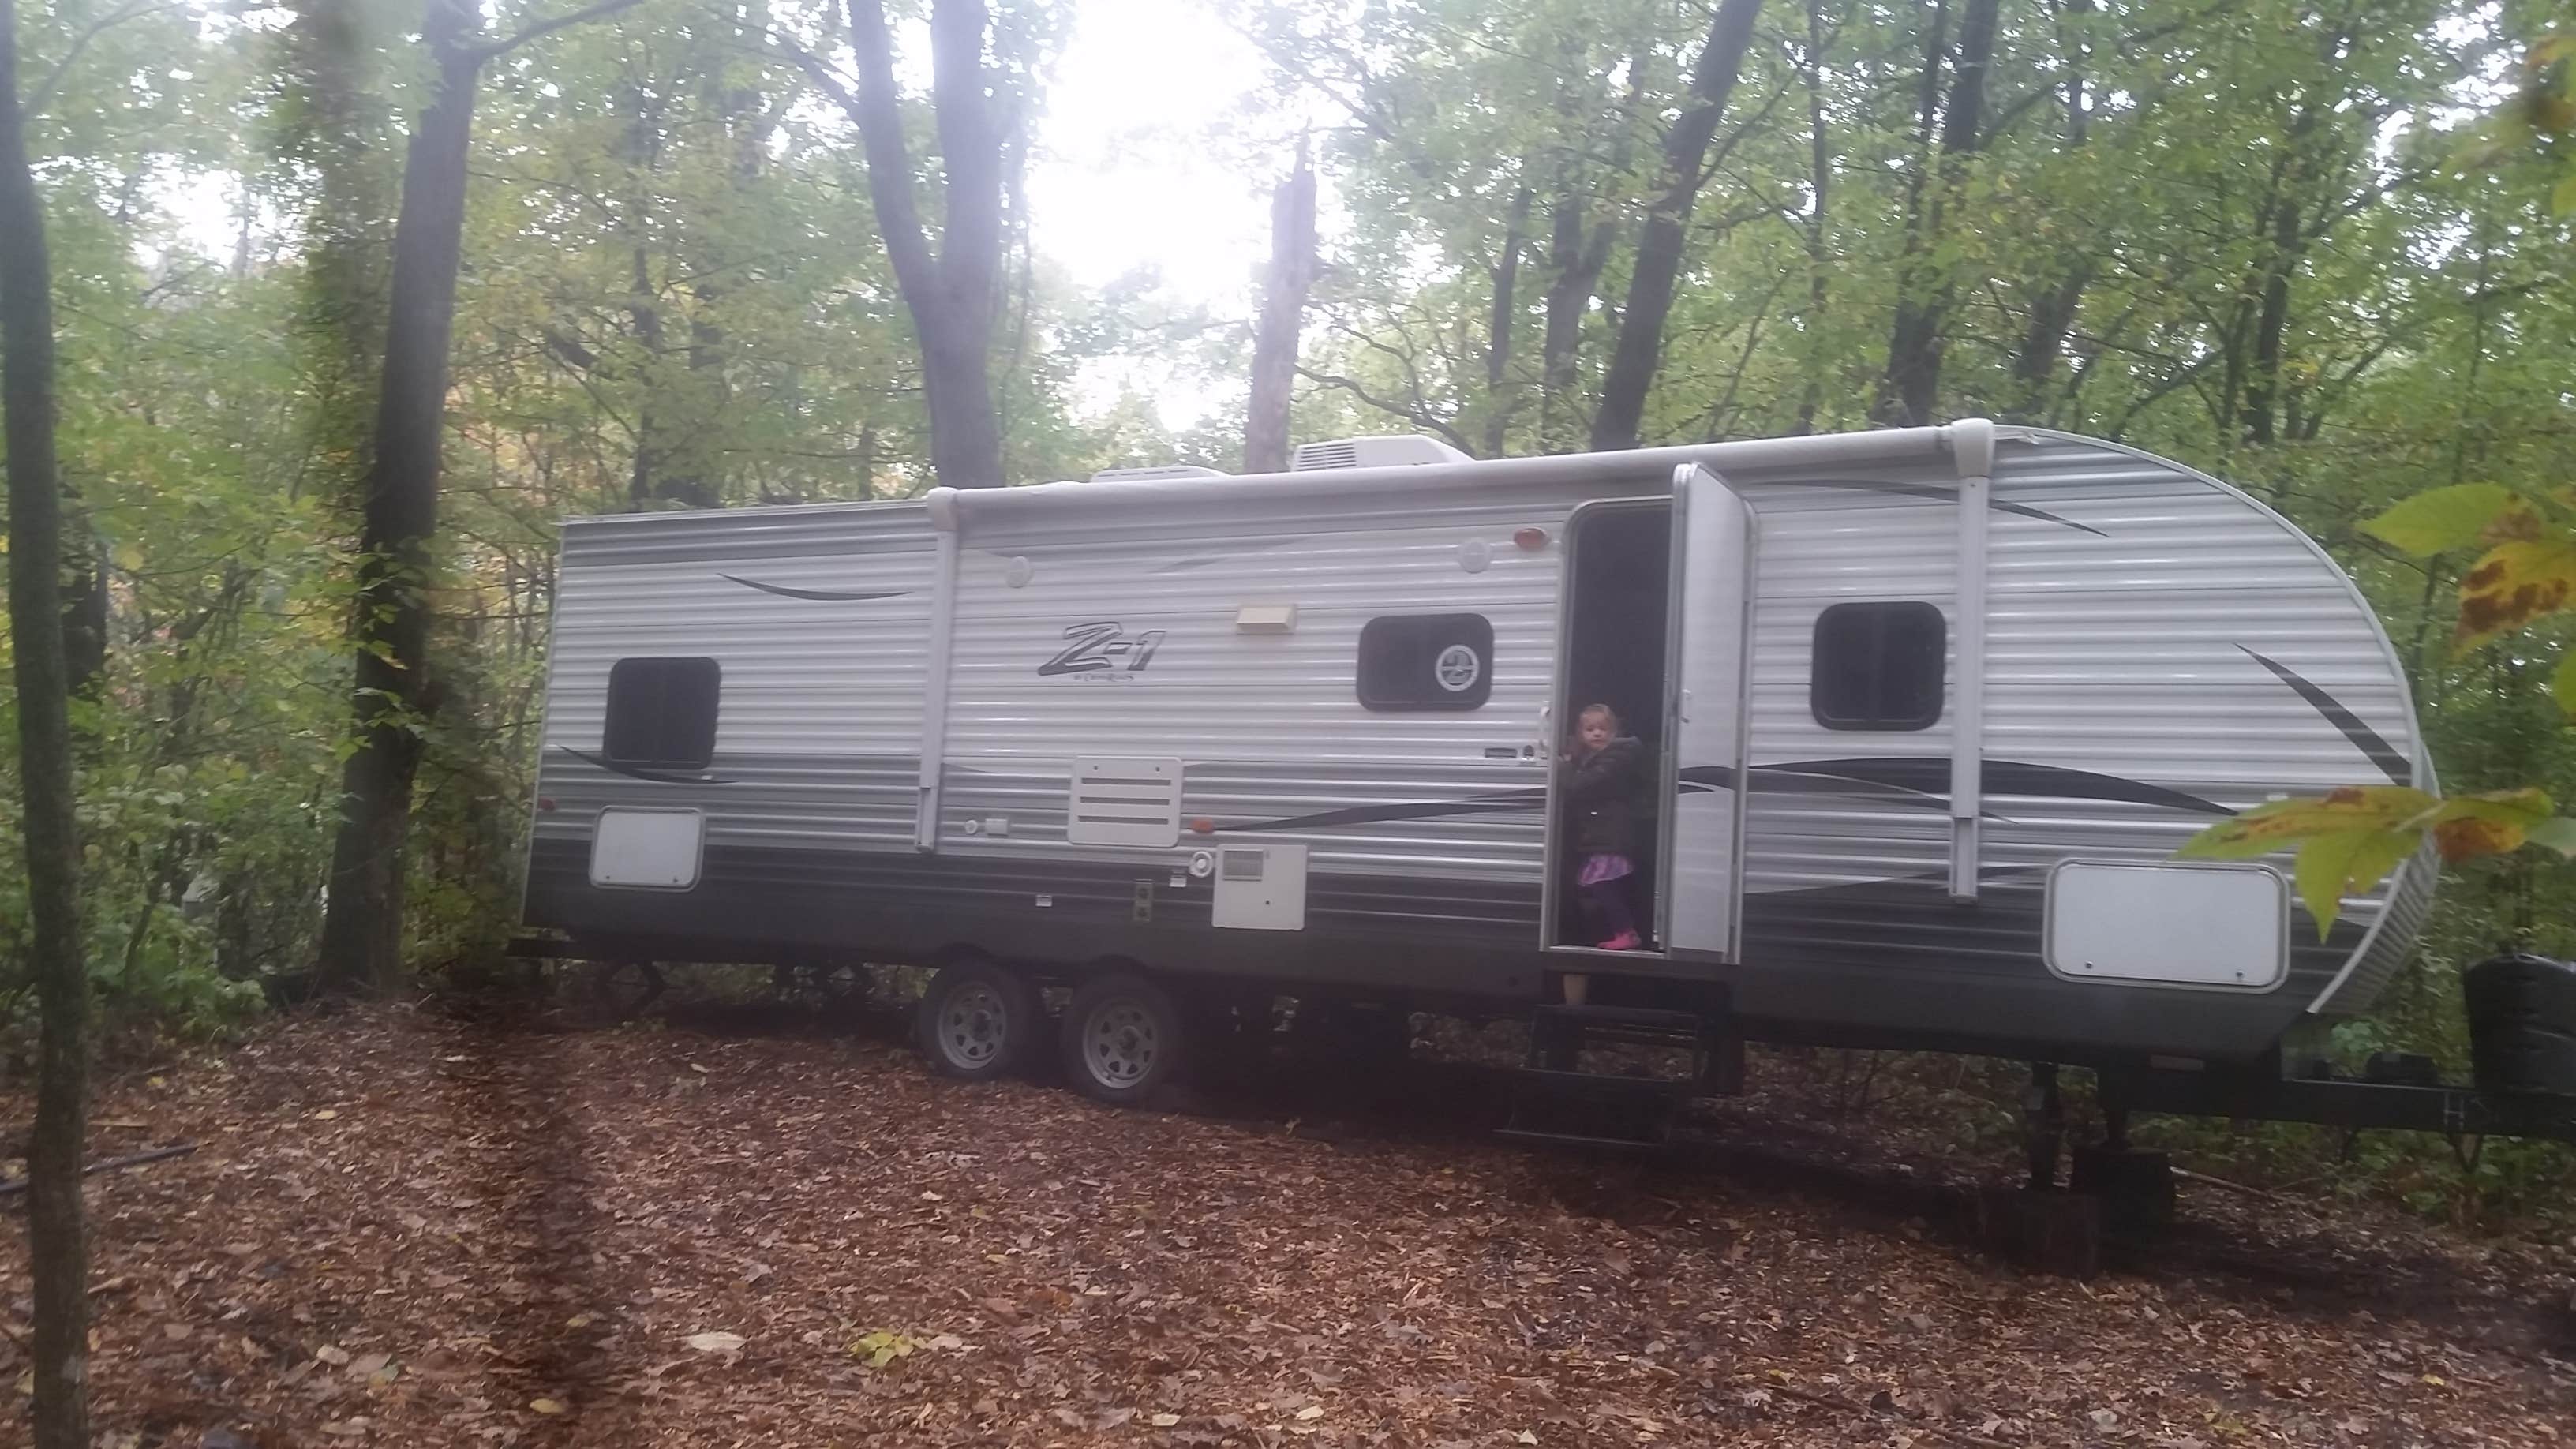 Camper submitted image from Camp Creek Campground - 3